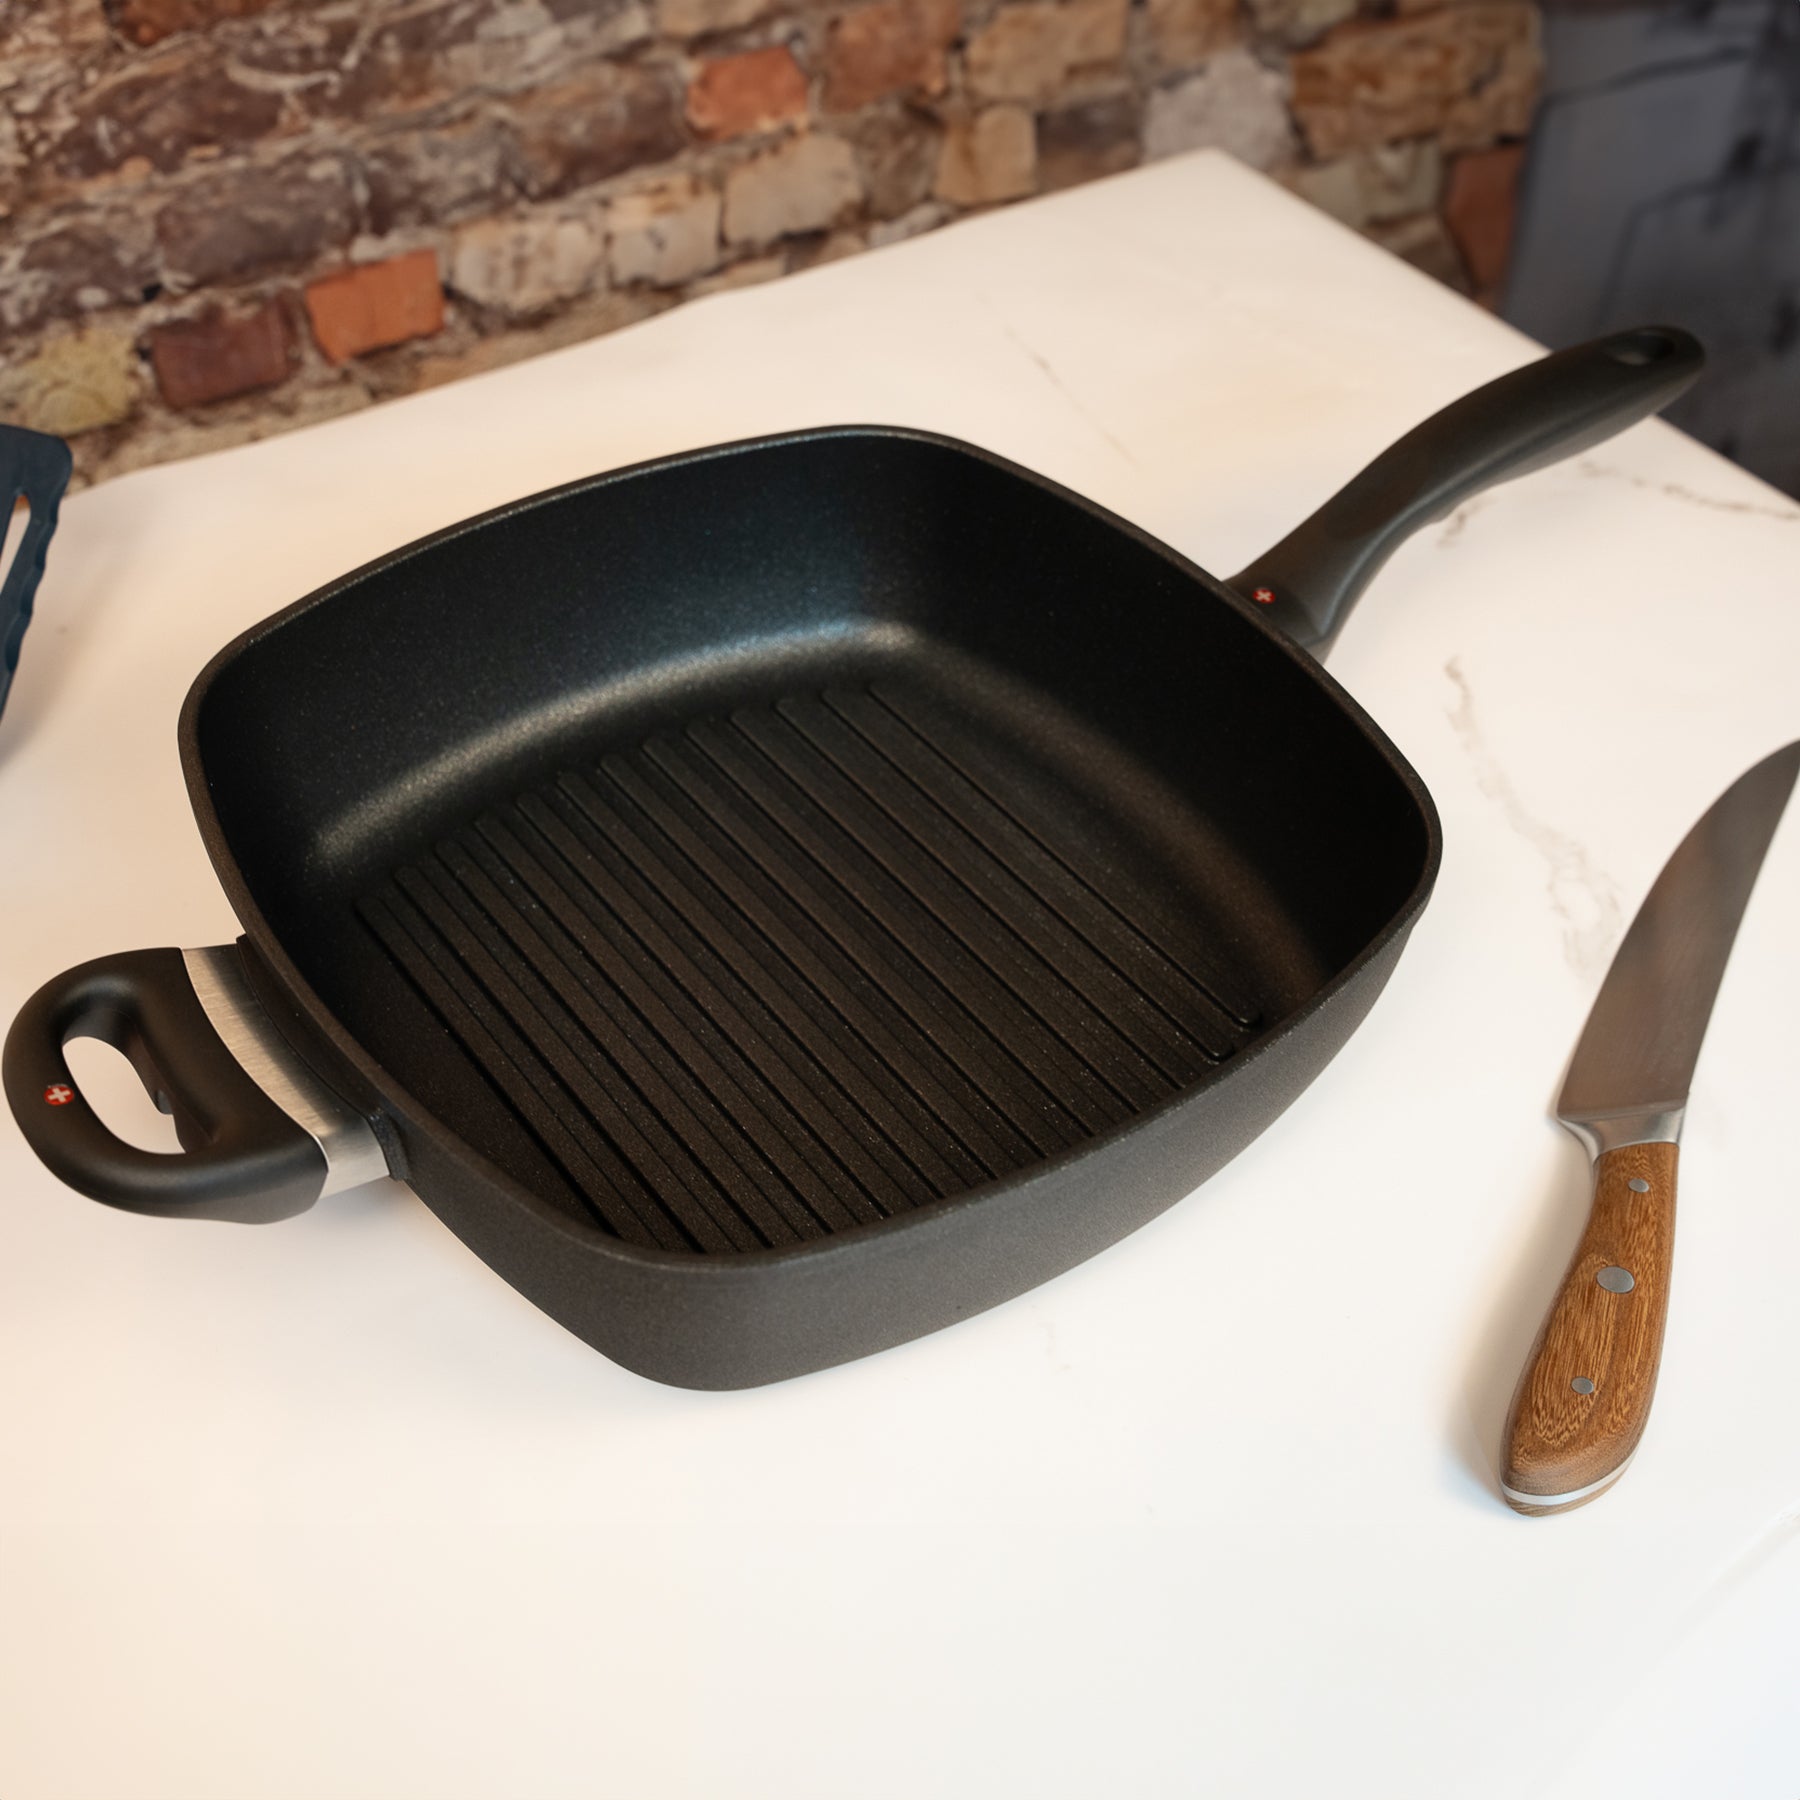 XD Nonstick 11" x 11" Deep Square Grill Pan - Induction in use on marble countertop